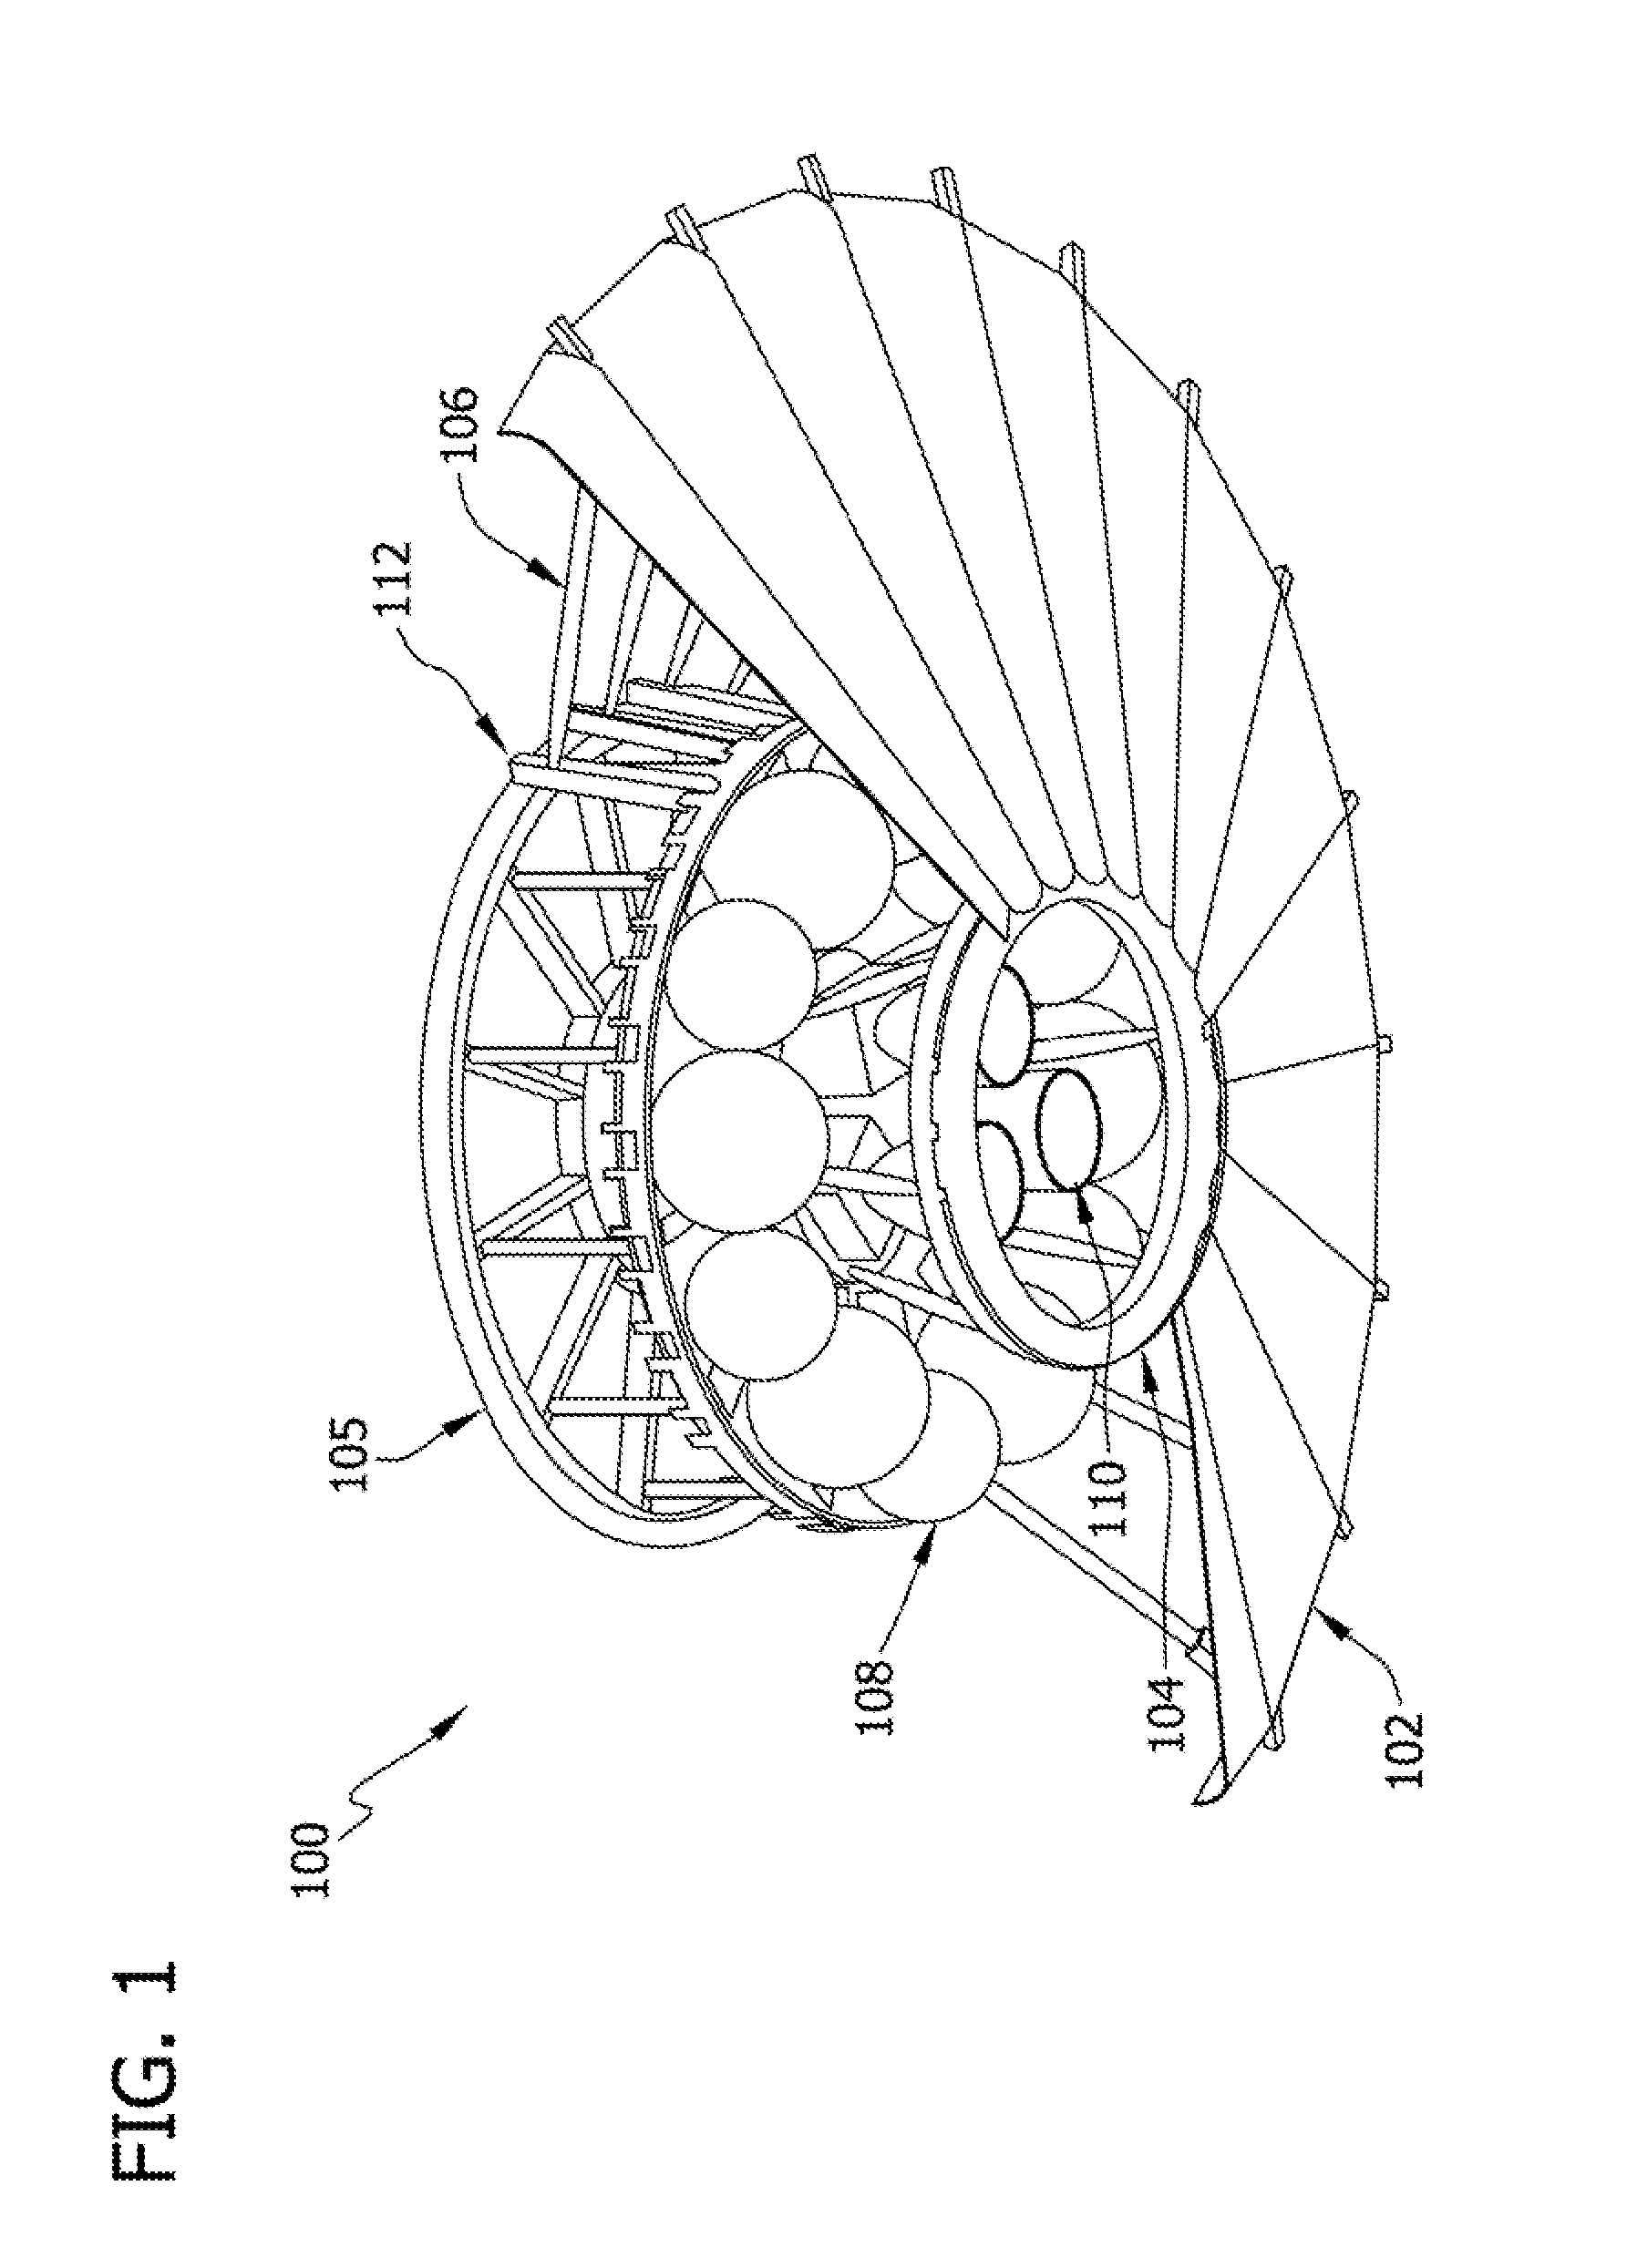 Transformable and reconfigurable entry, descent and landing systems and methods